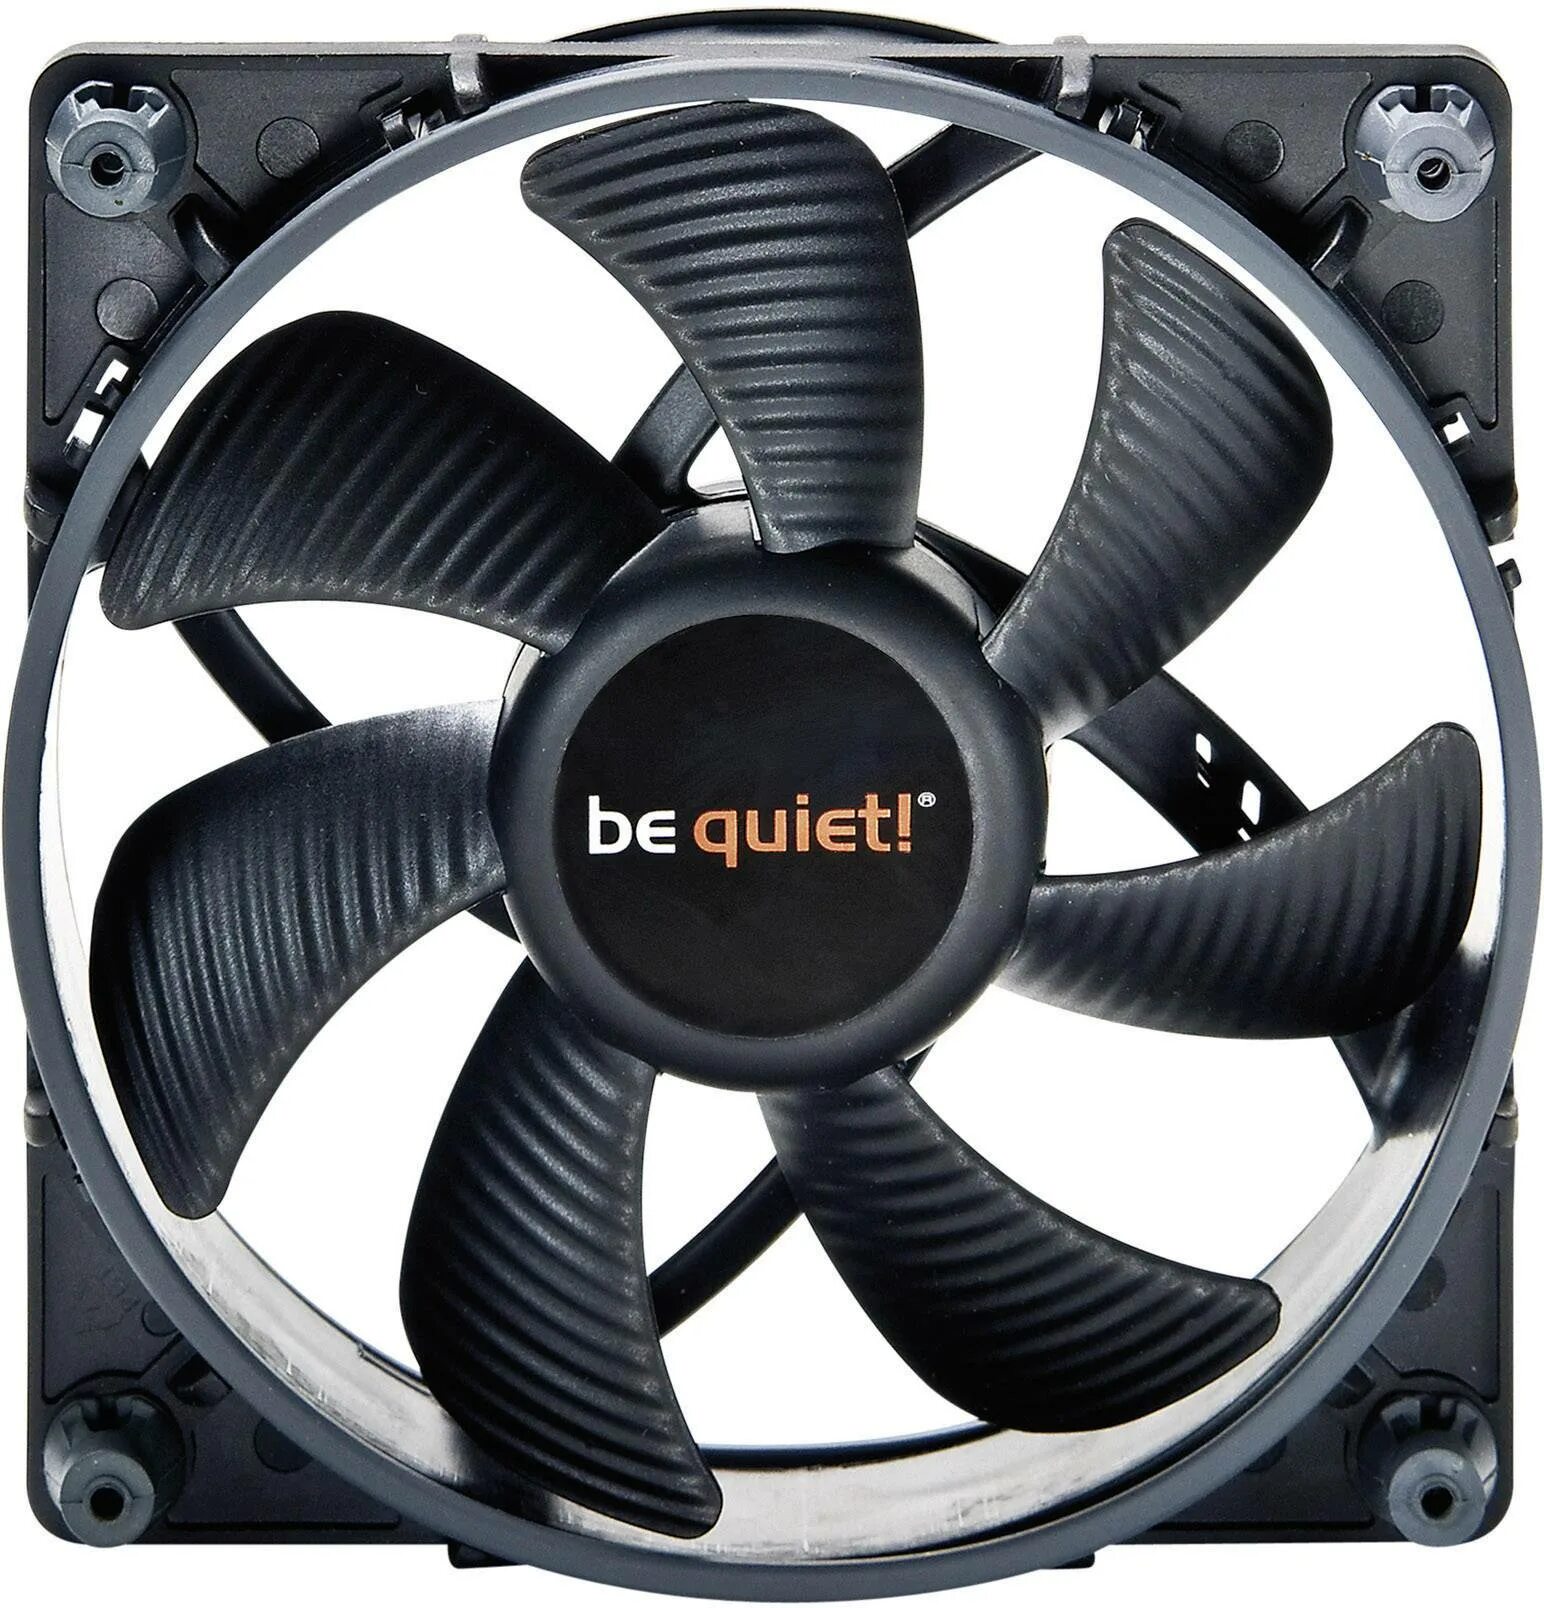 Be quiet! Shadow Wings 2 120mm PWM. Вентилятор be quiet Shadow Wings. Be quiet вентиляторы 120 White. Вентилятор be quiet! Light Wings 120mm. Pc fans